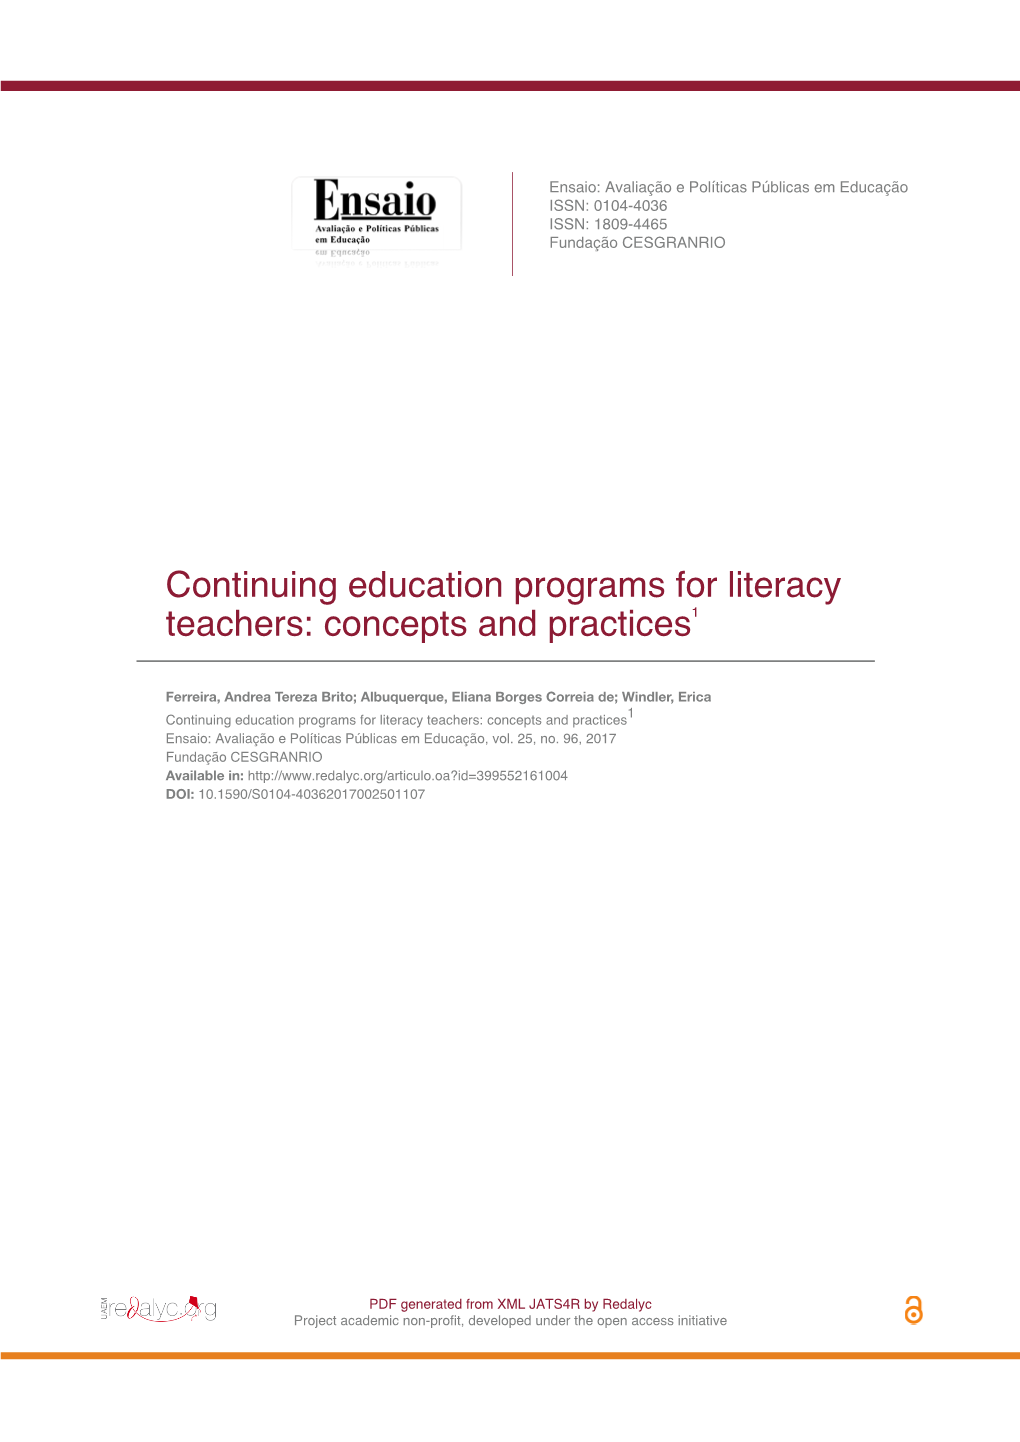 Continuing Education Programs for Literacy Teachers: Concepts and Practices1